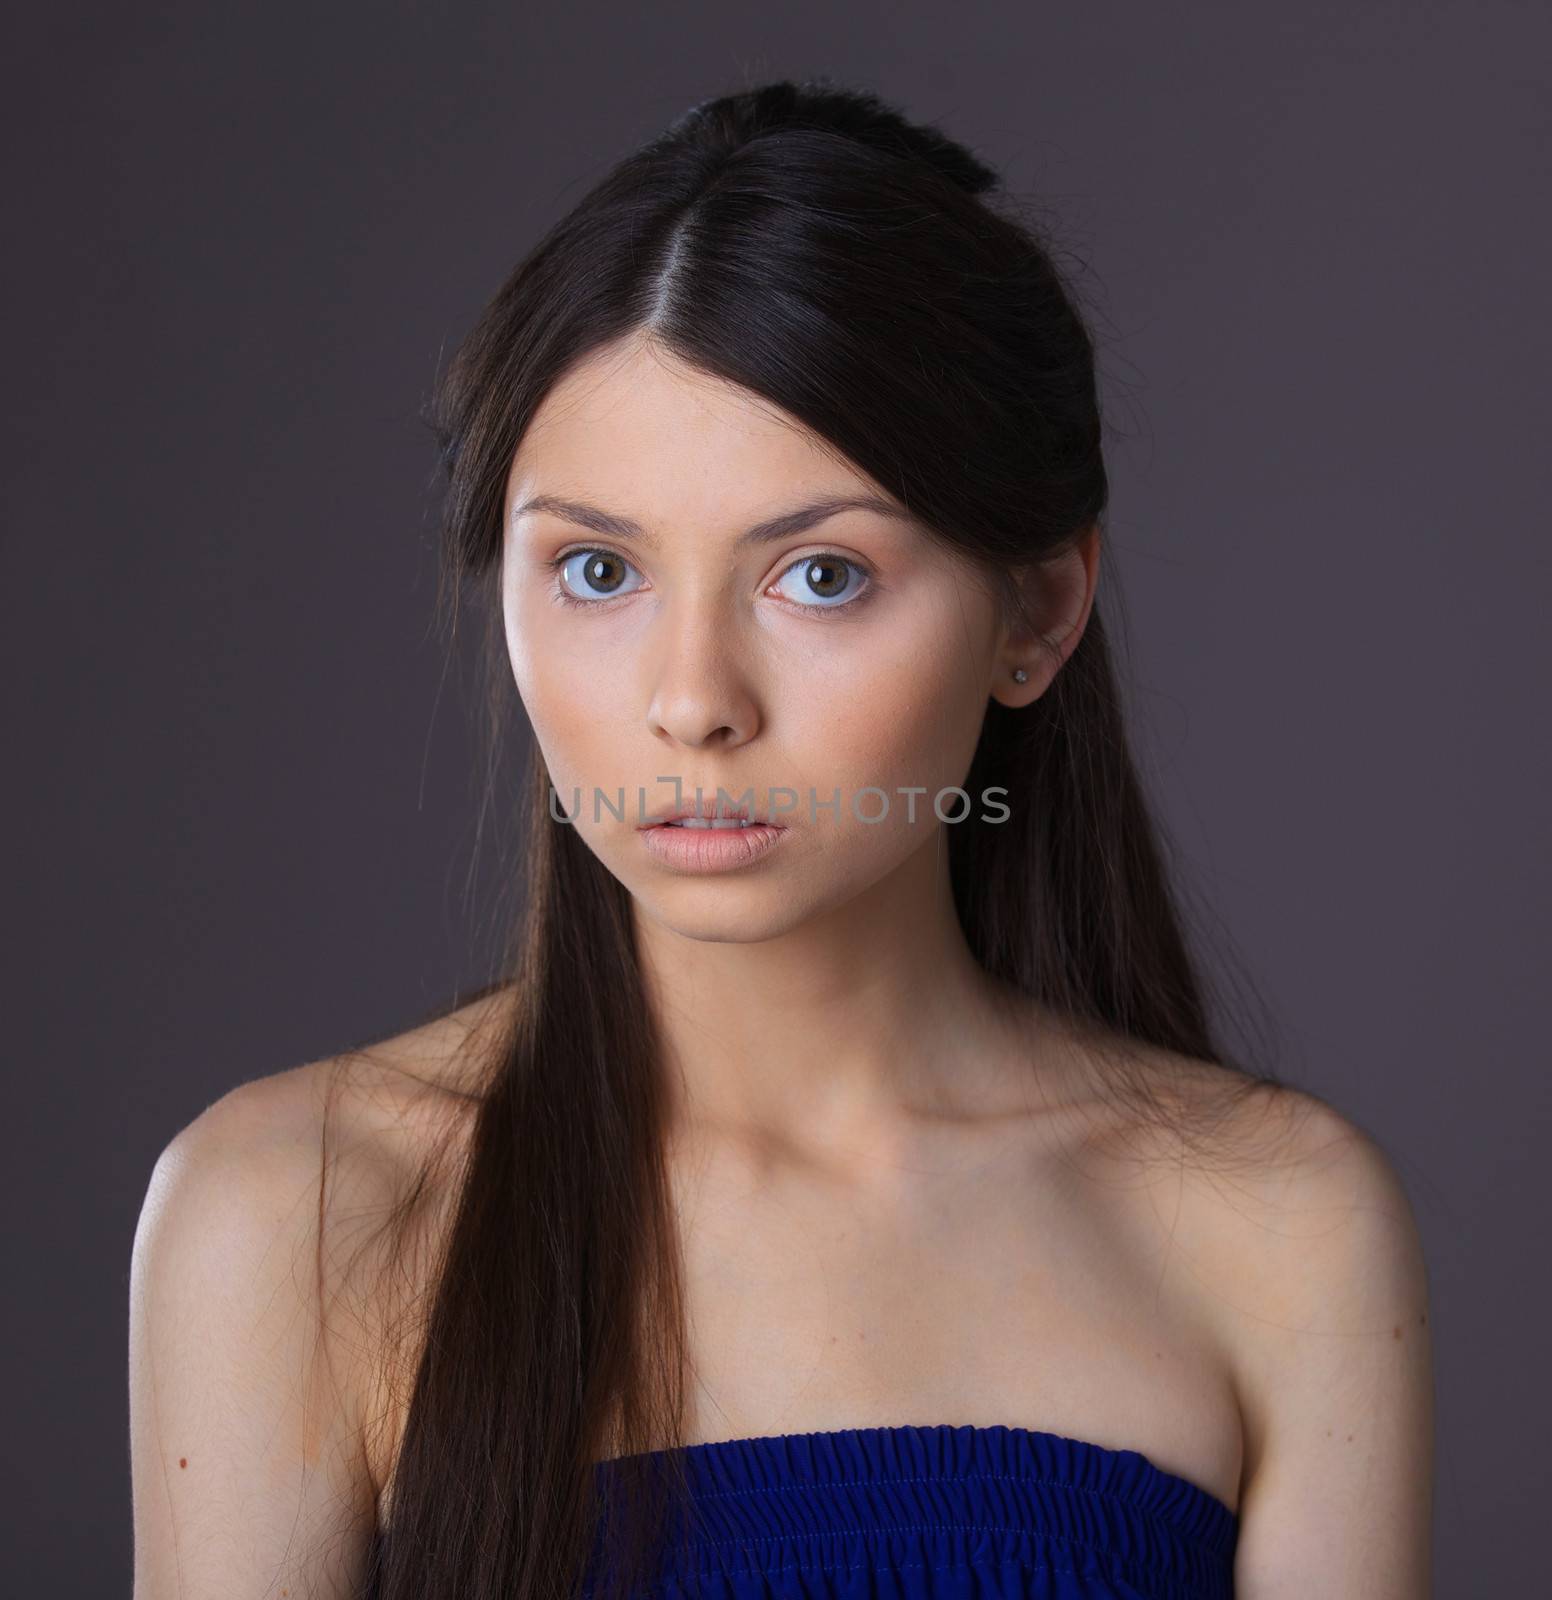 Clouse-up glamour portrait of beautiful woman model with fresh daily makeup and romantic hairstyle.